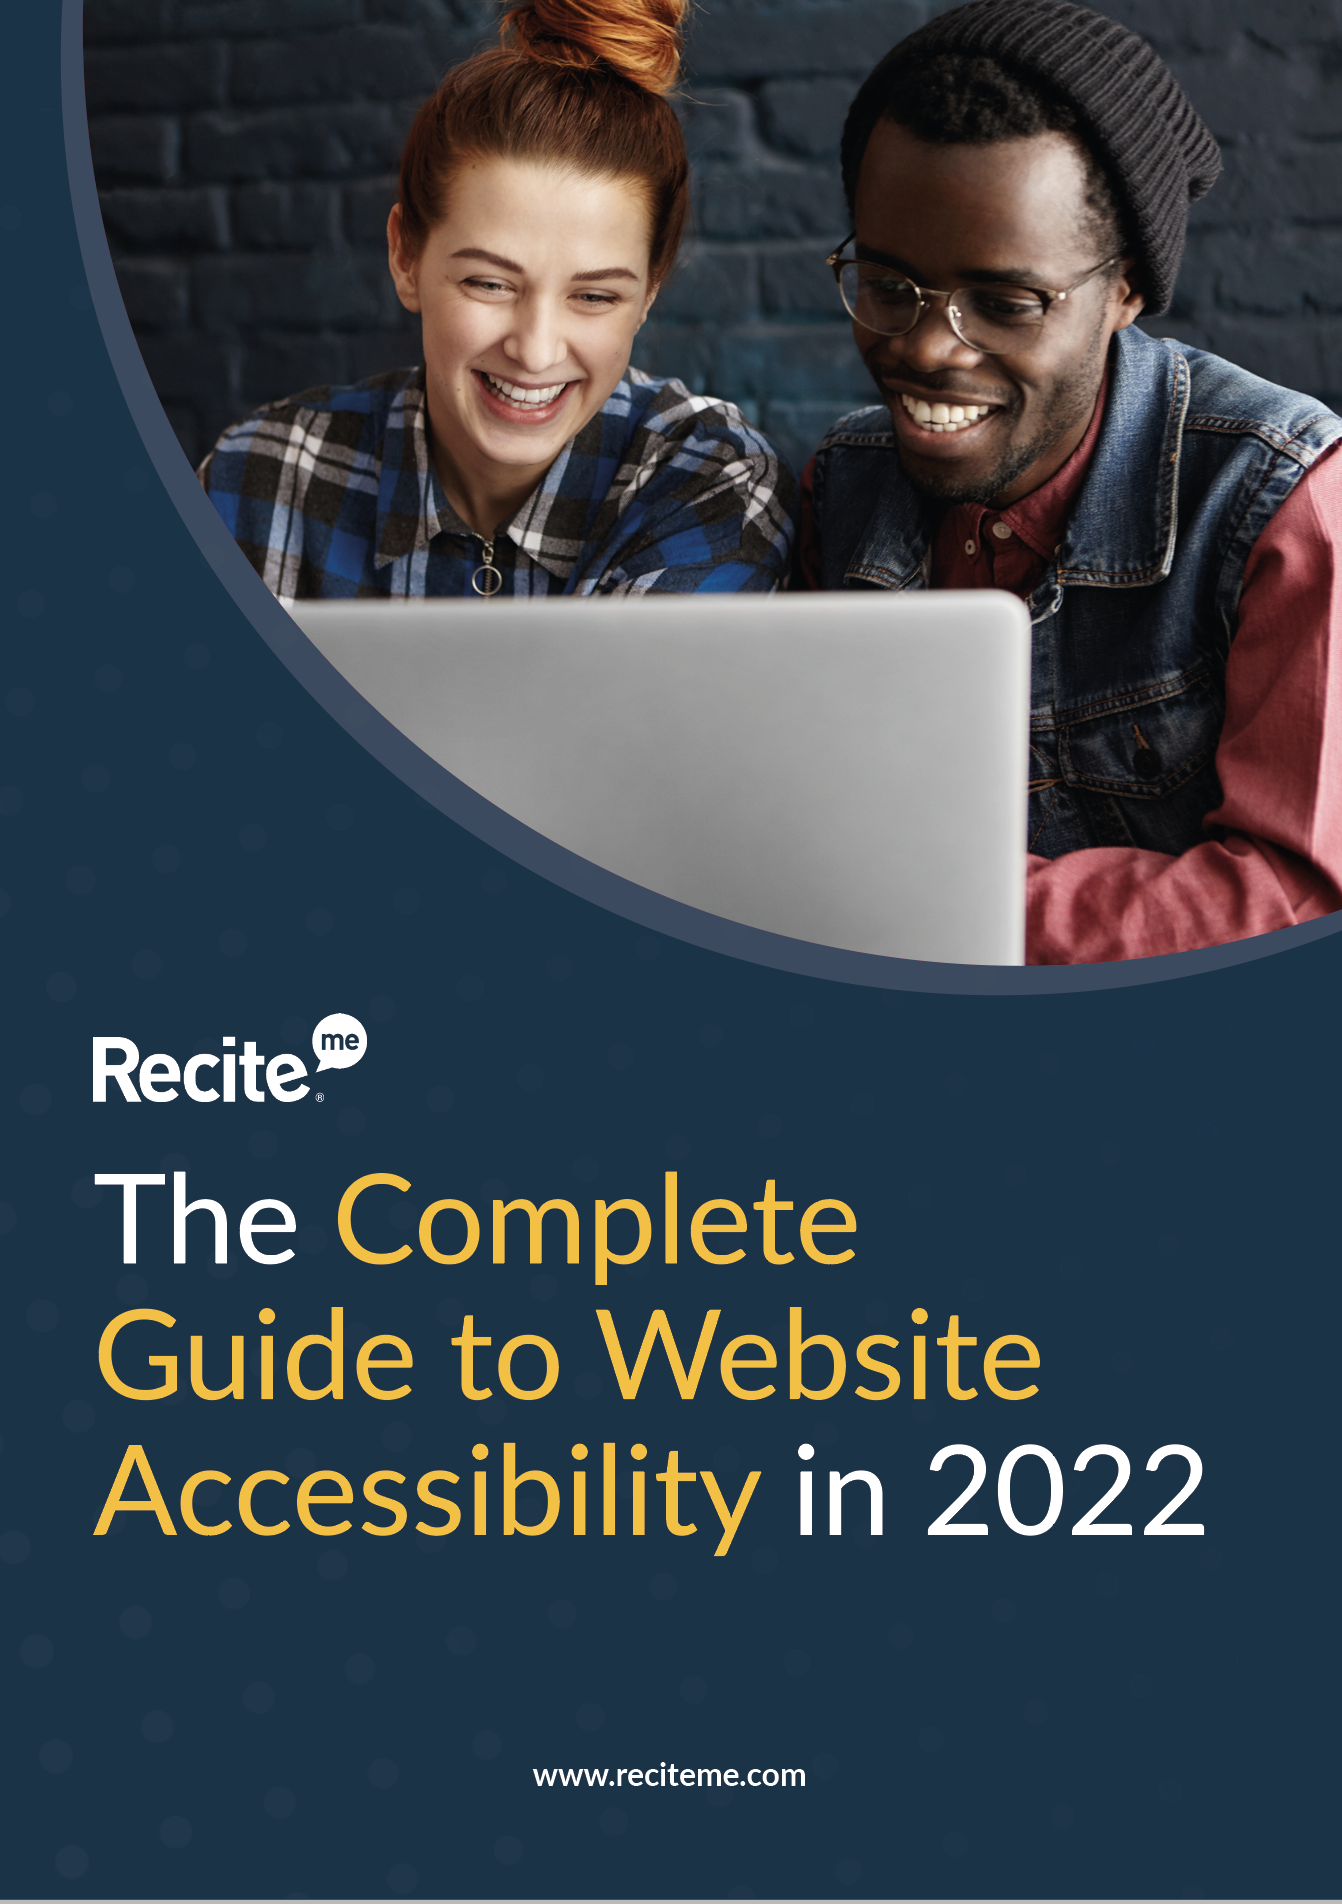 Front cover of the Guide to Website Accessibility in 2022